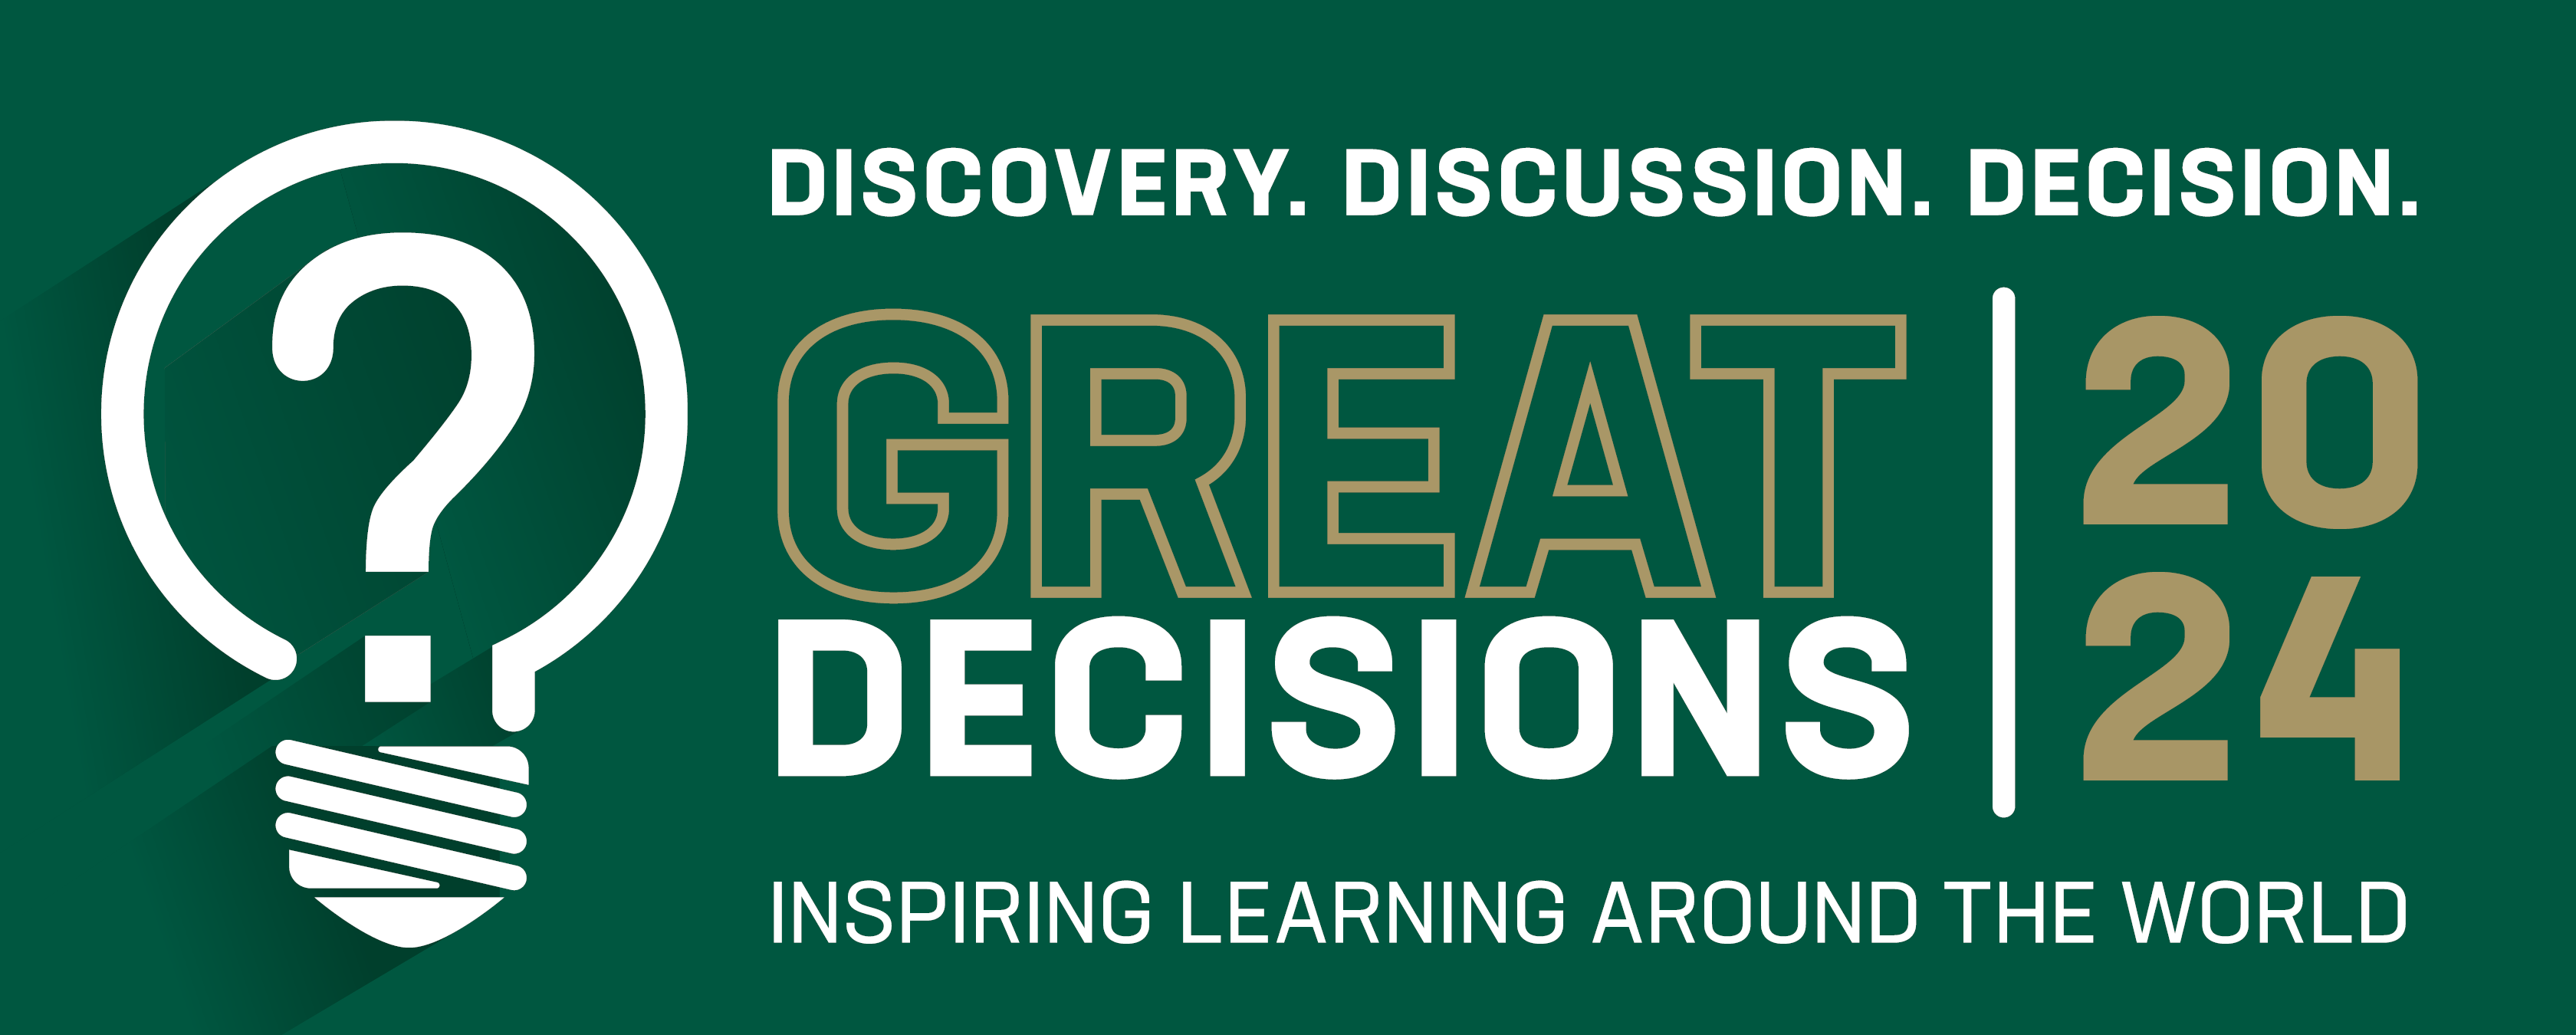 Great Decisions logo